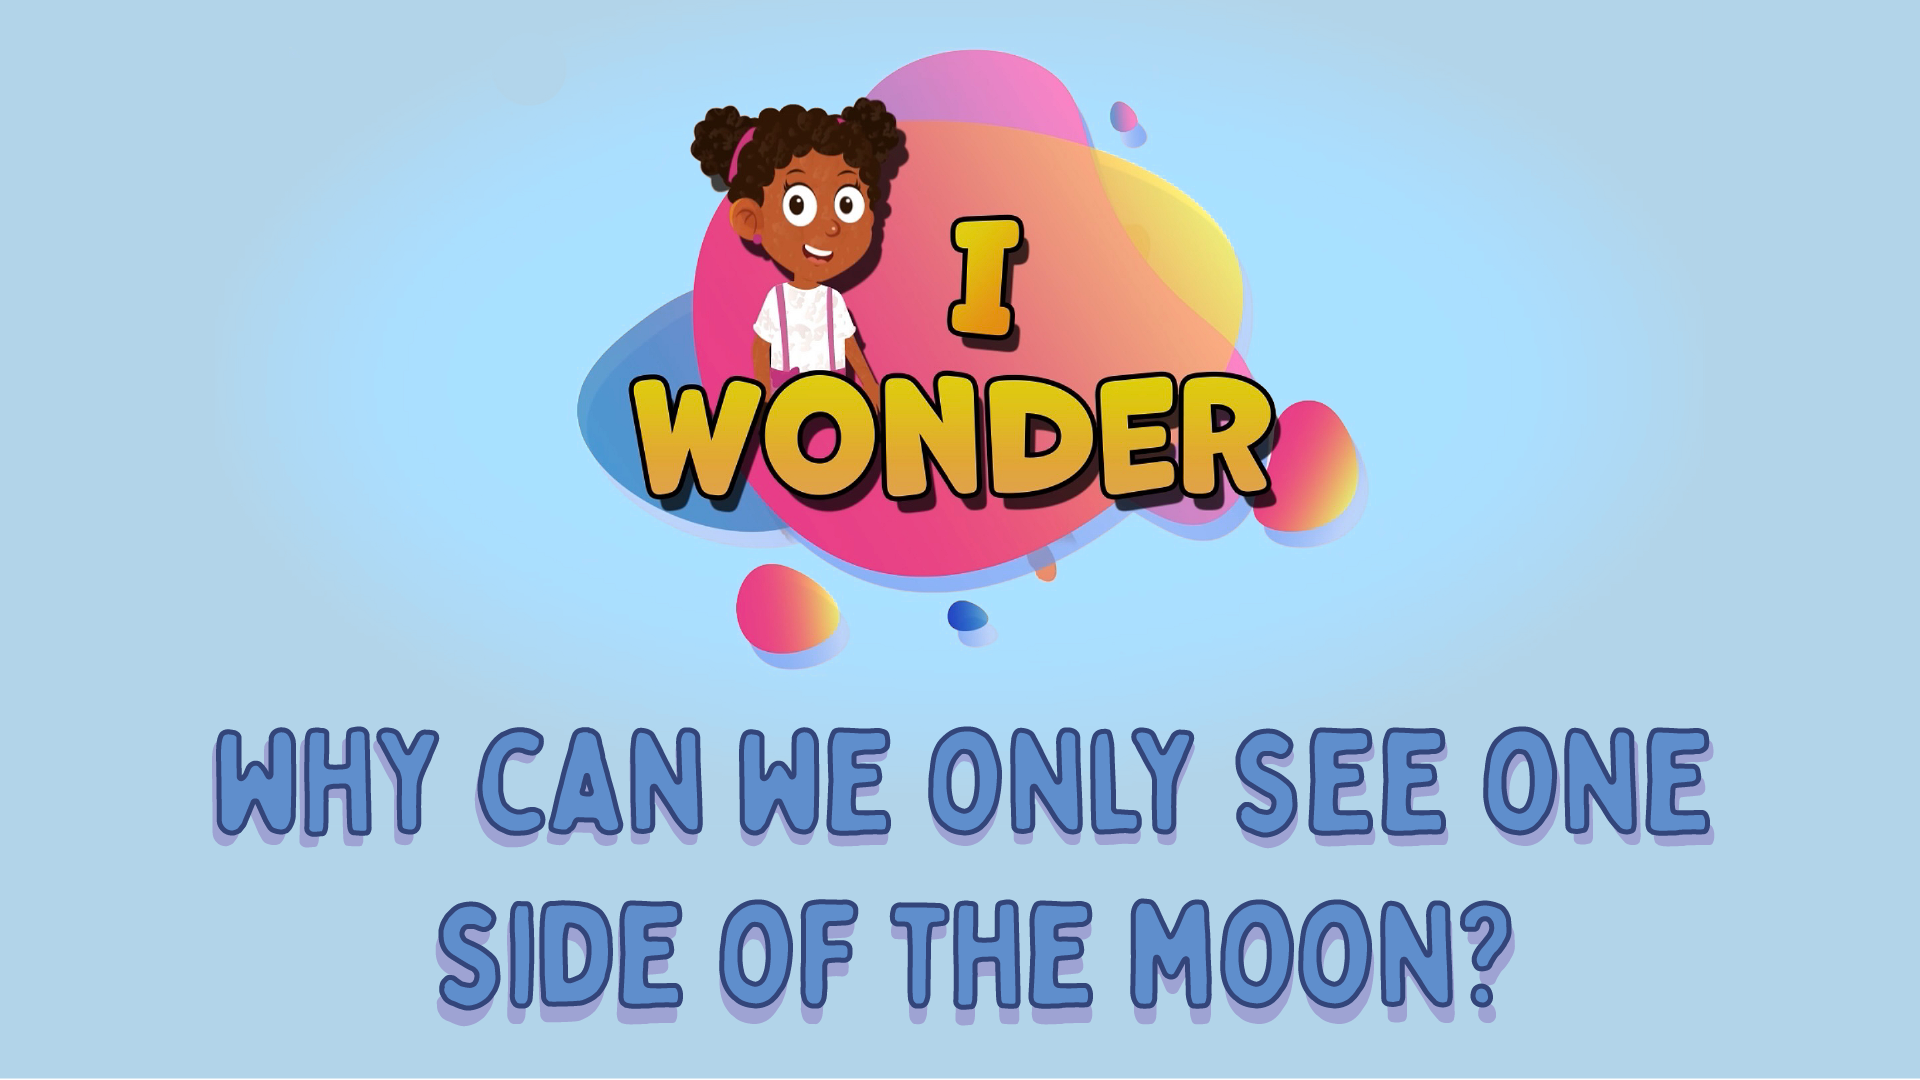 Why Can We Only See One Side Of The Moon?